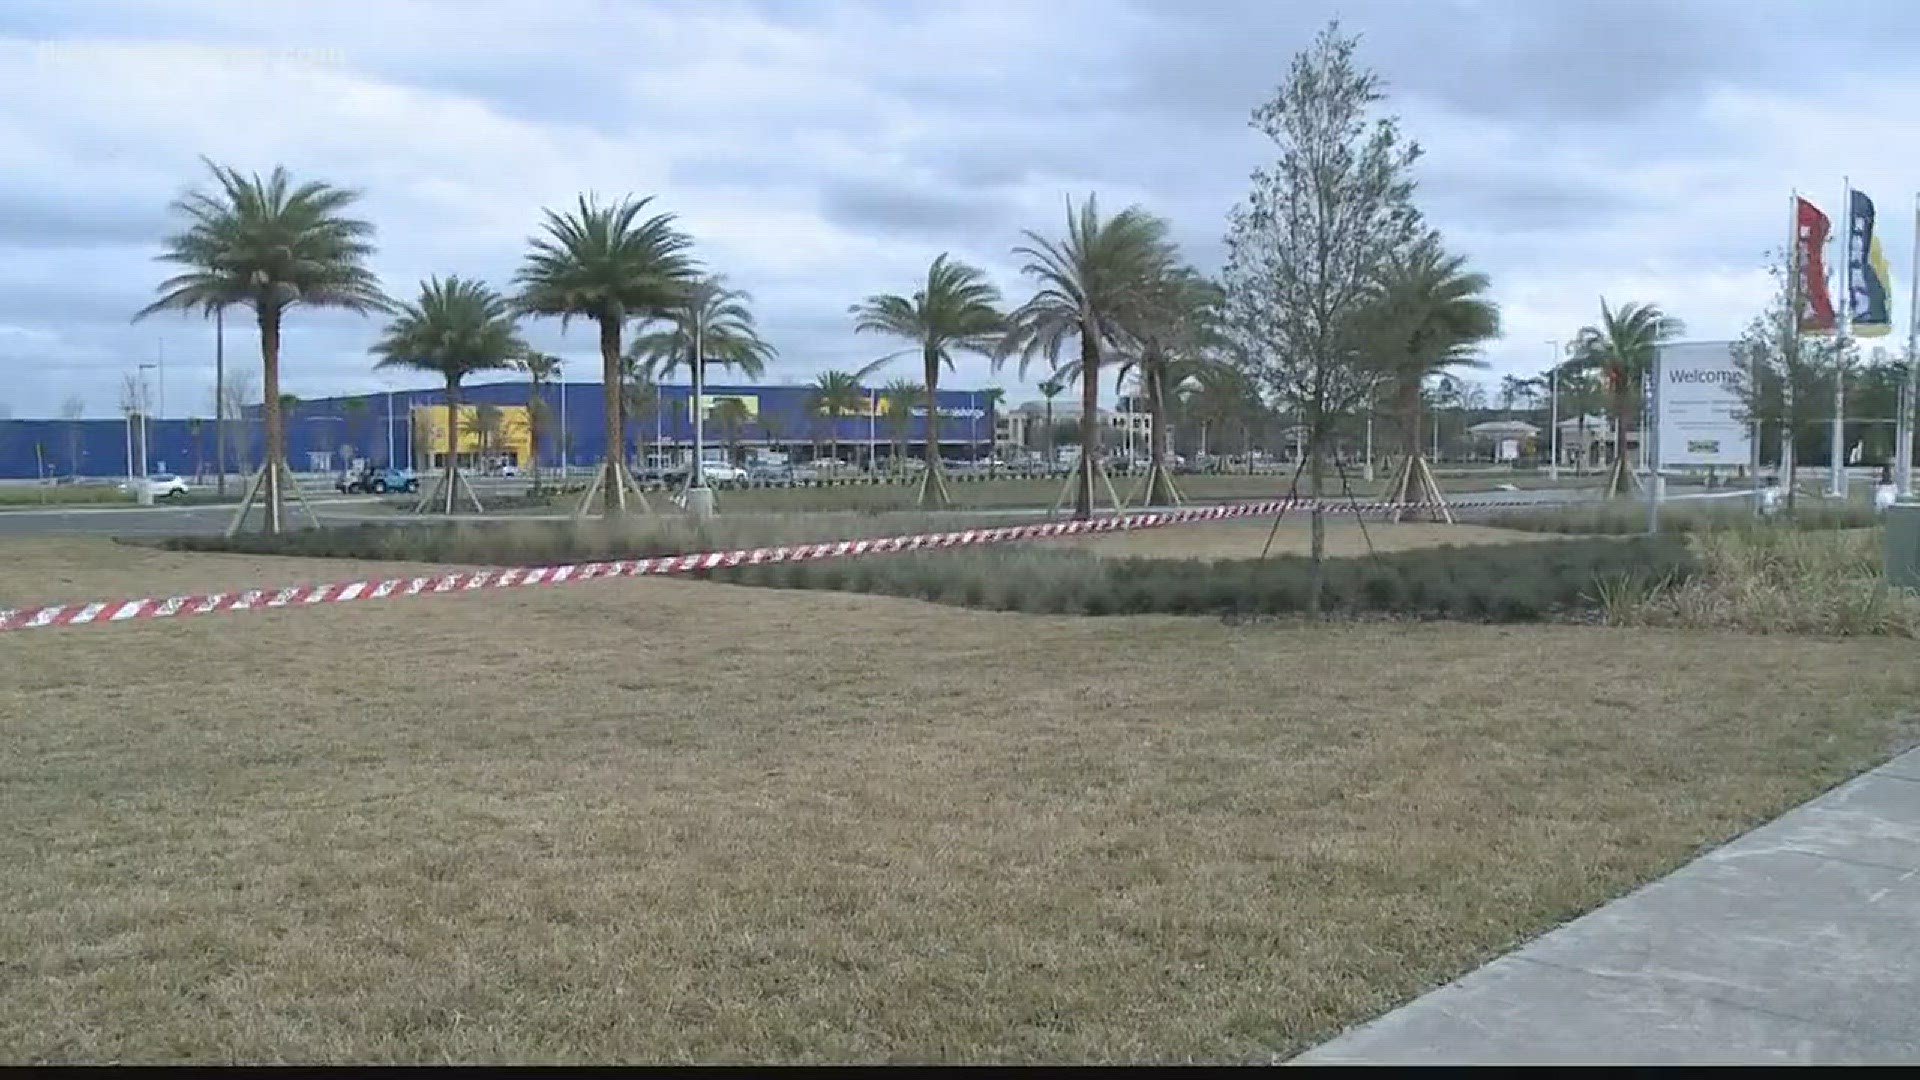 The IKEA store in Jacksonville was evacuated after a suspicious package was found in the parking lot.